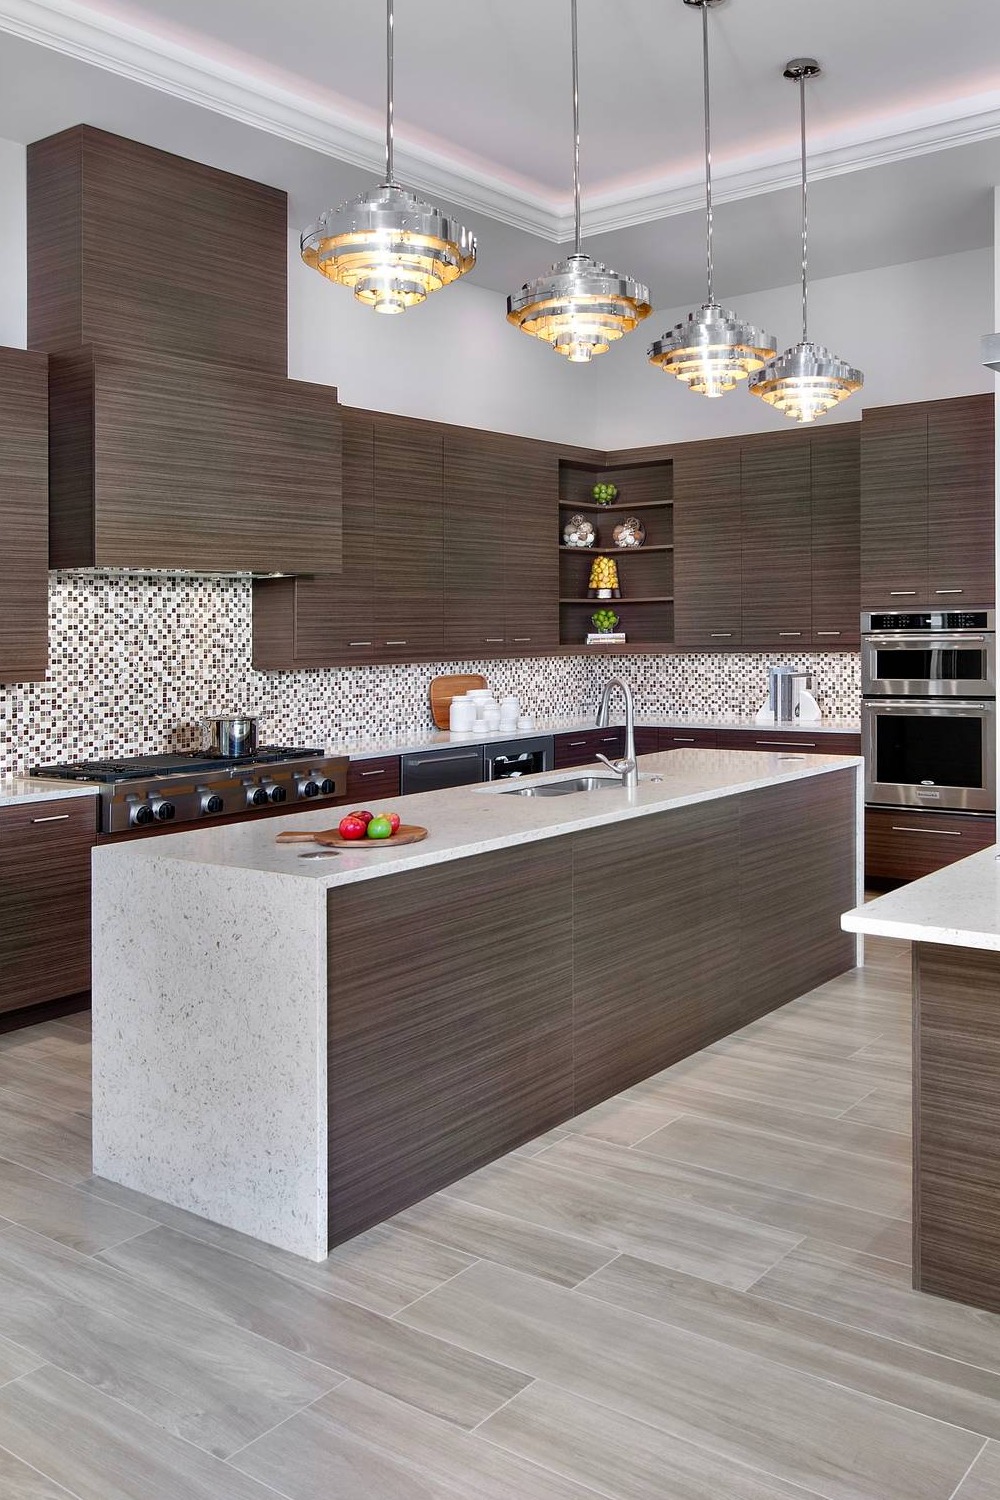 Kitchen Project Contemporary Kitchen Cabinets Dream Kitchen Brushed Nickel Other Styles Sleek